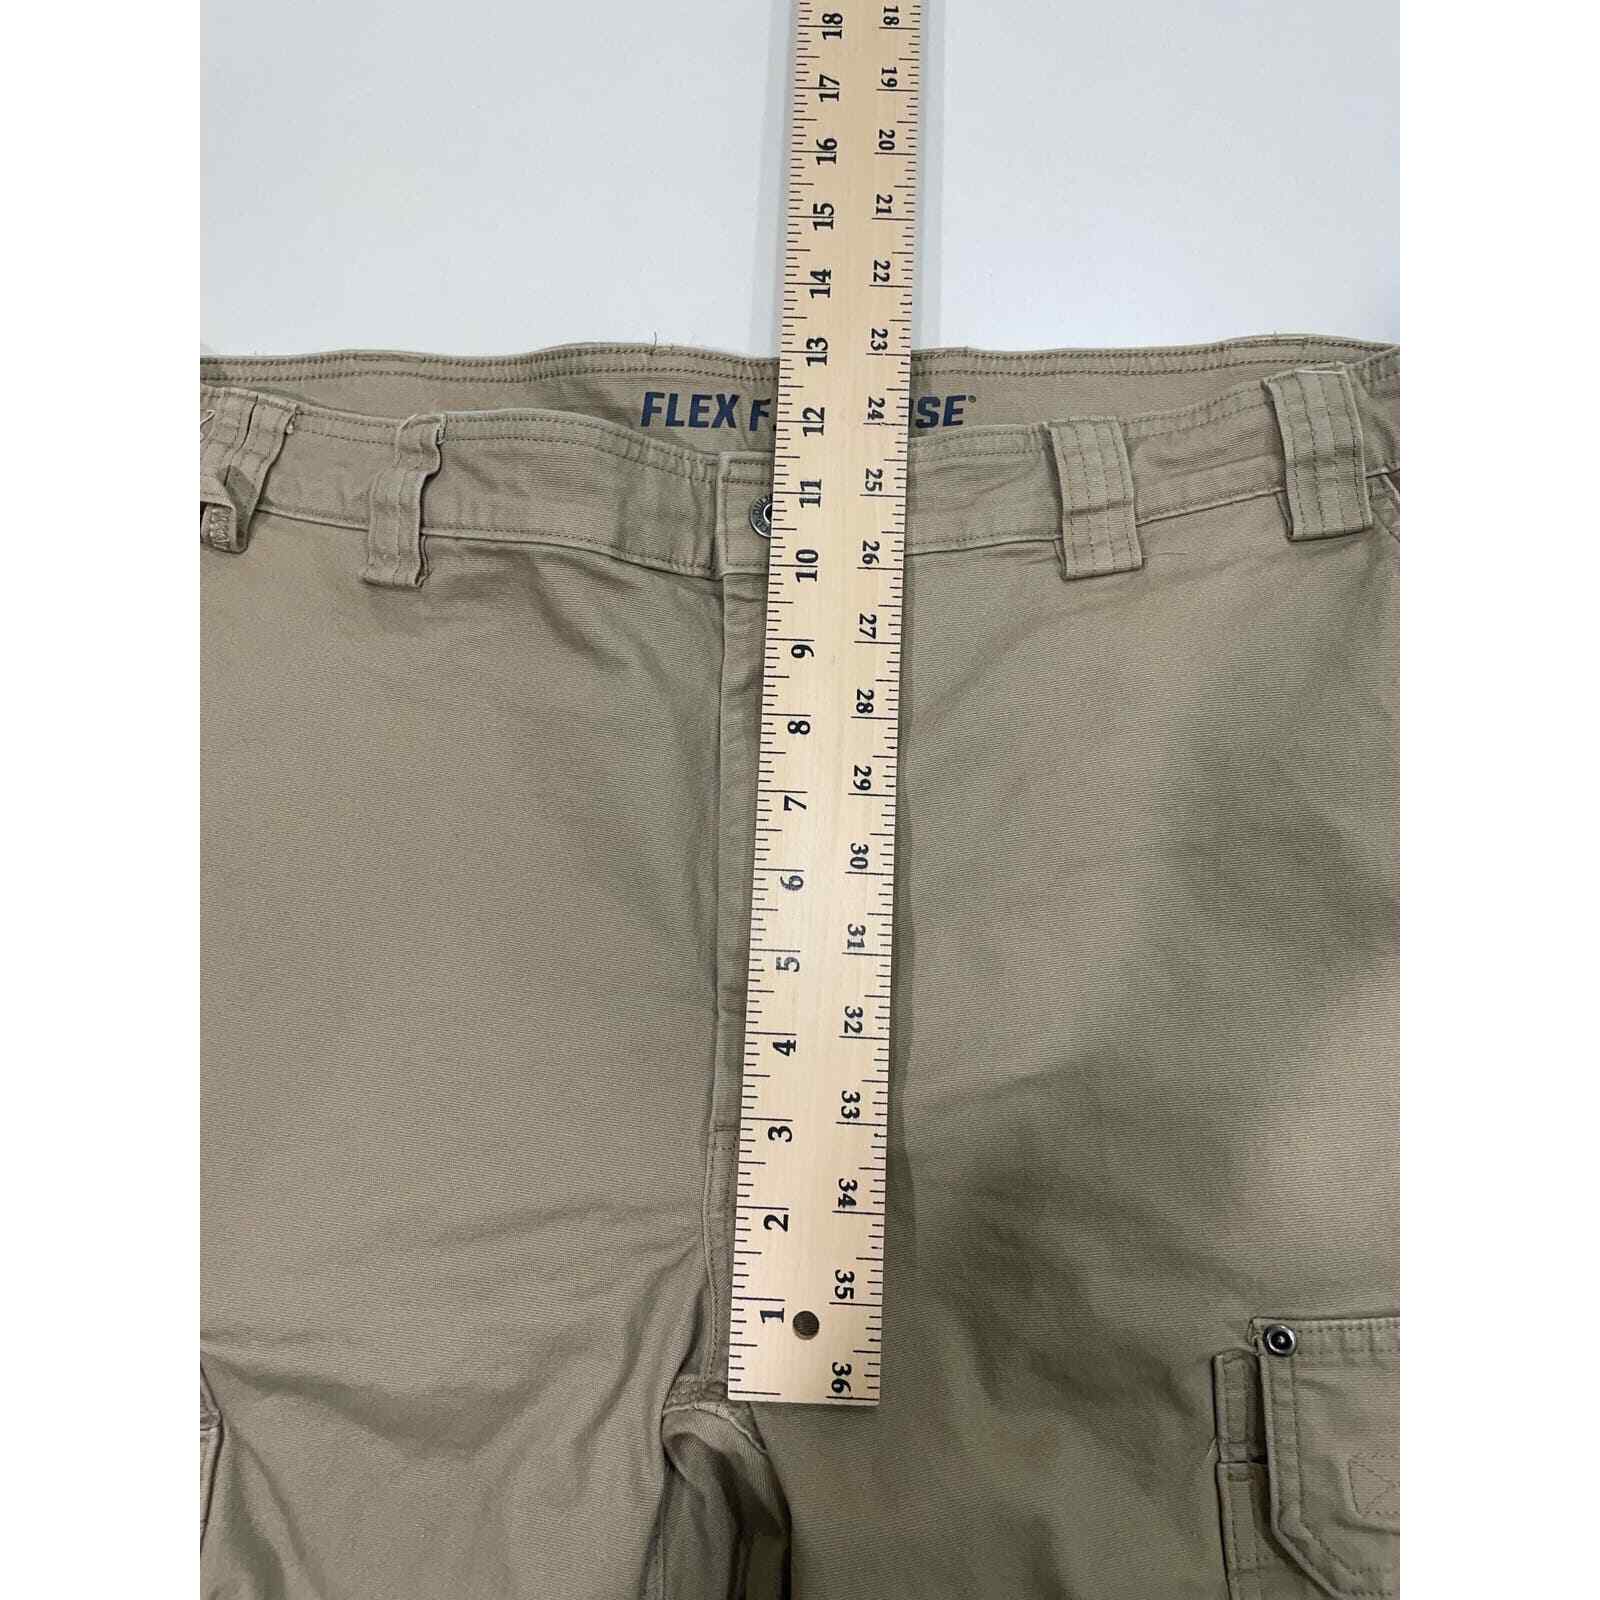 Duluth Trading Co Pants Mens 44x28 Tan Relaxed Ca… - image 7